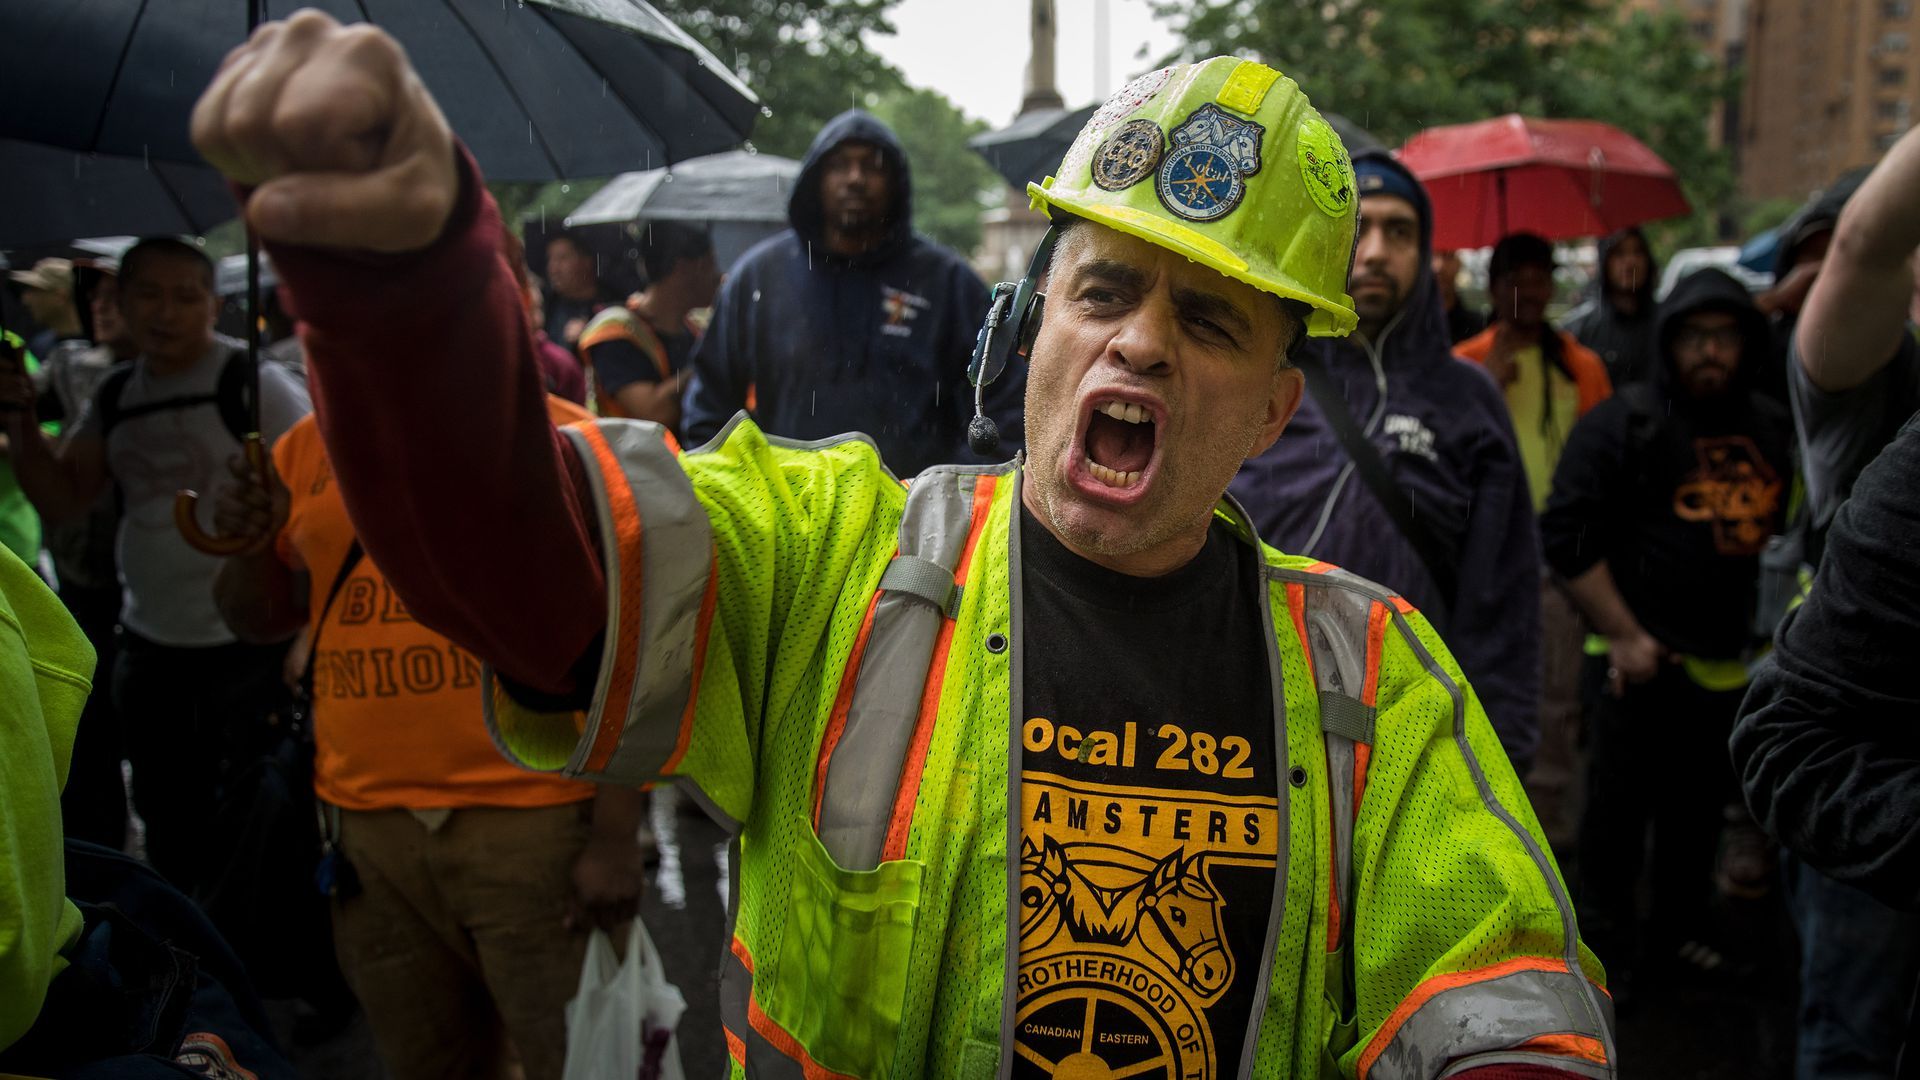 A construction worker protests with his fist in the air